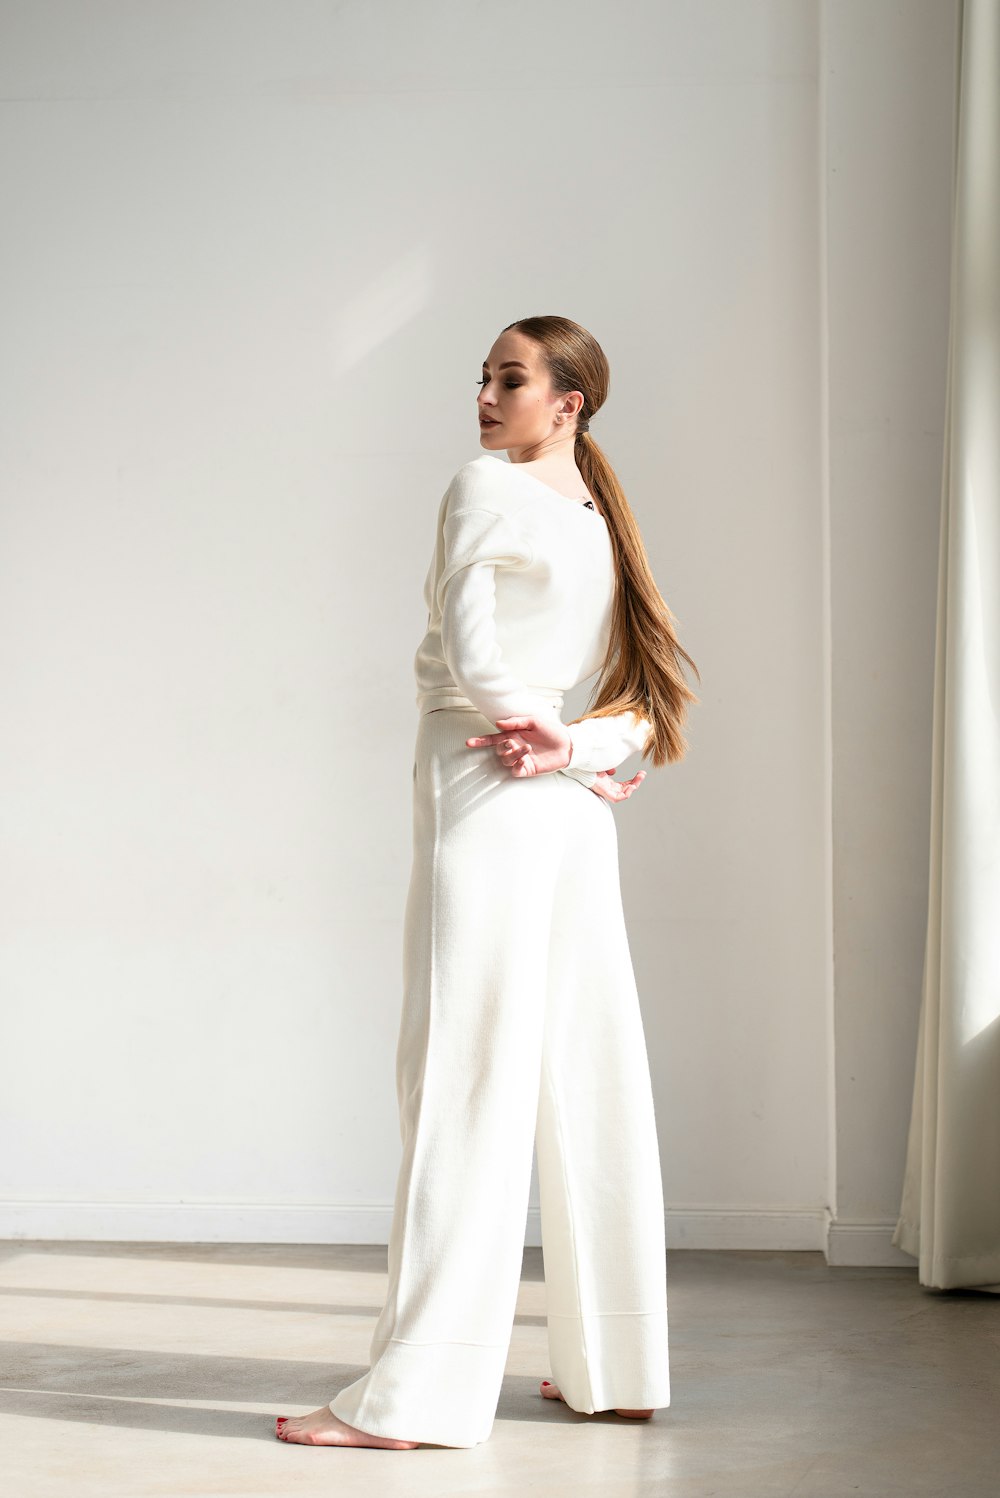 a woman standing in a room wearing a white outfit